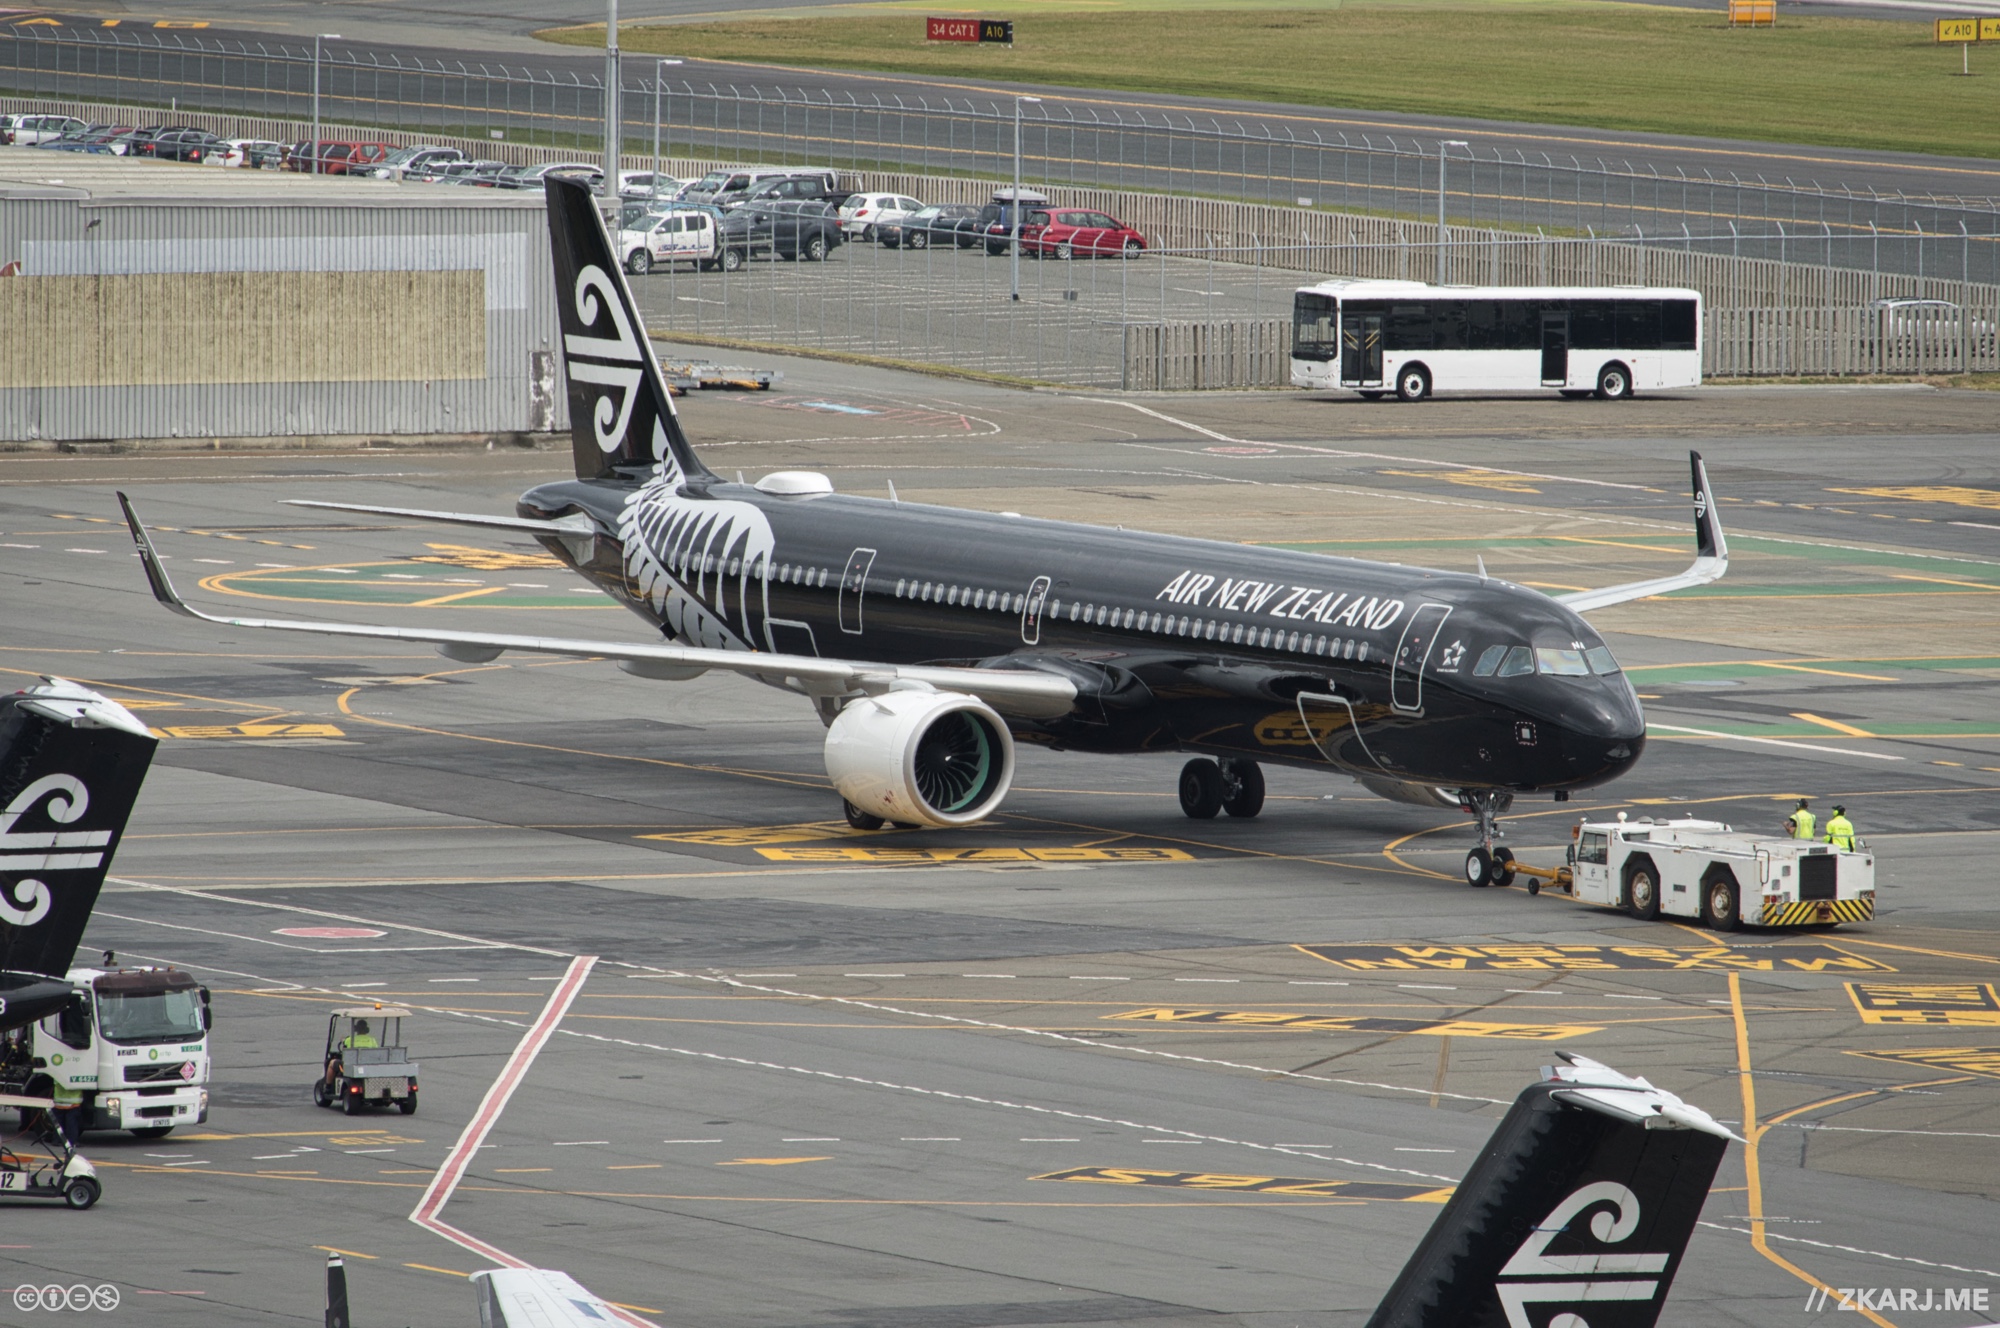 Merry Christmas from Air New Zealand